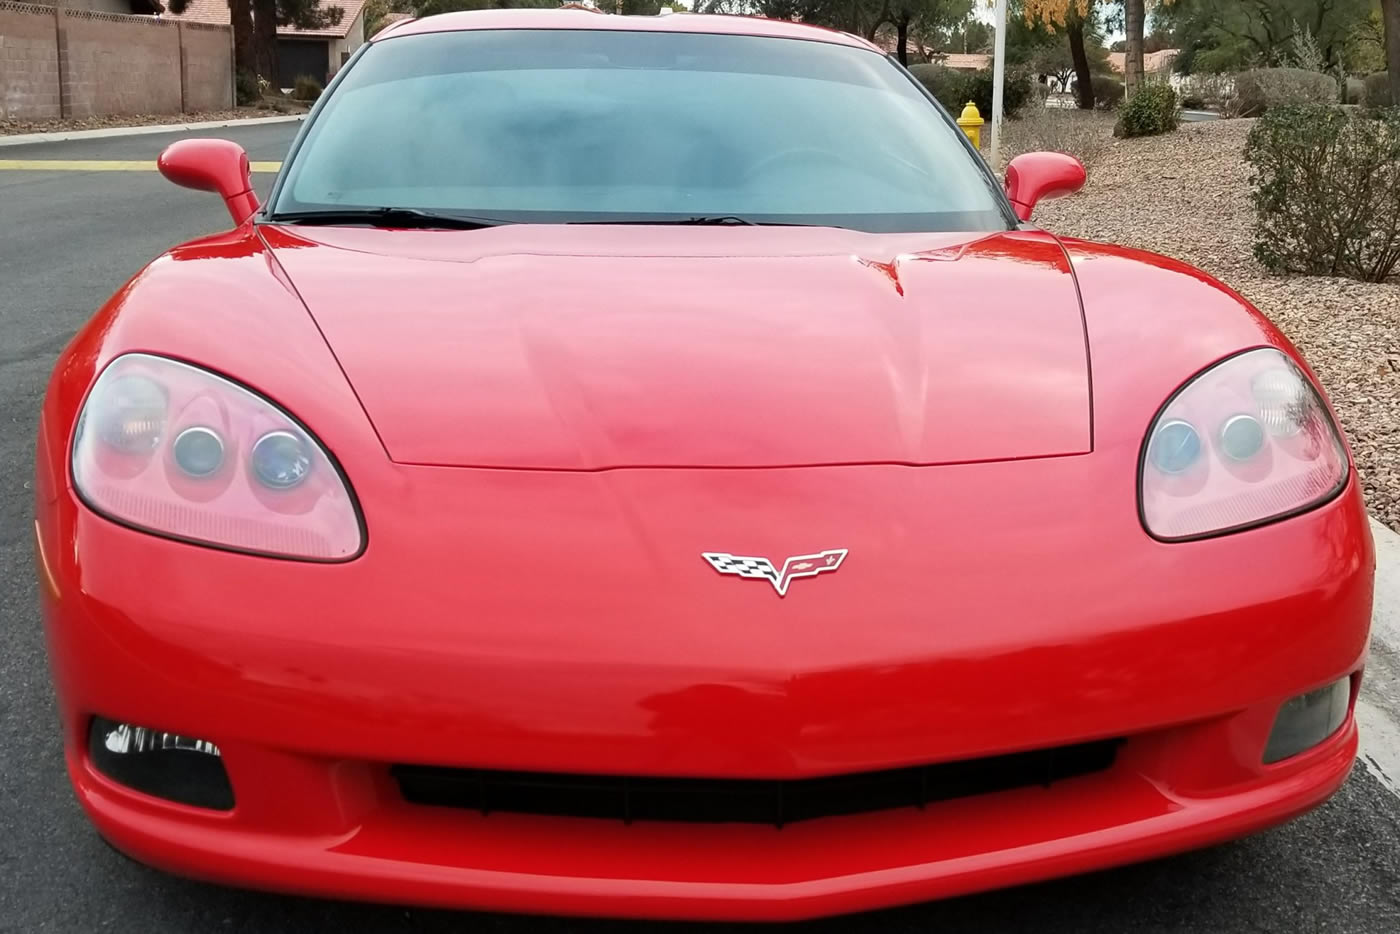 2012 Corvette Coupe 6-Speed in Torch Red